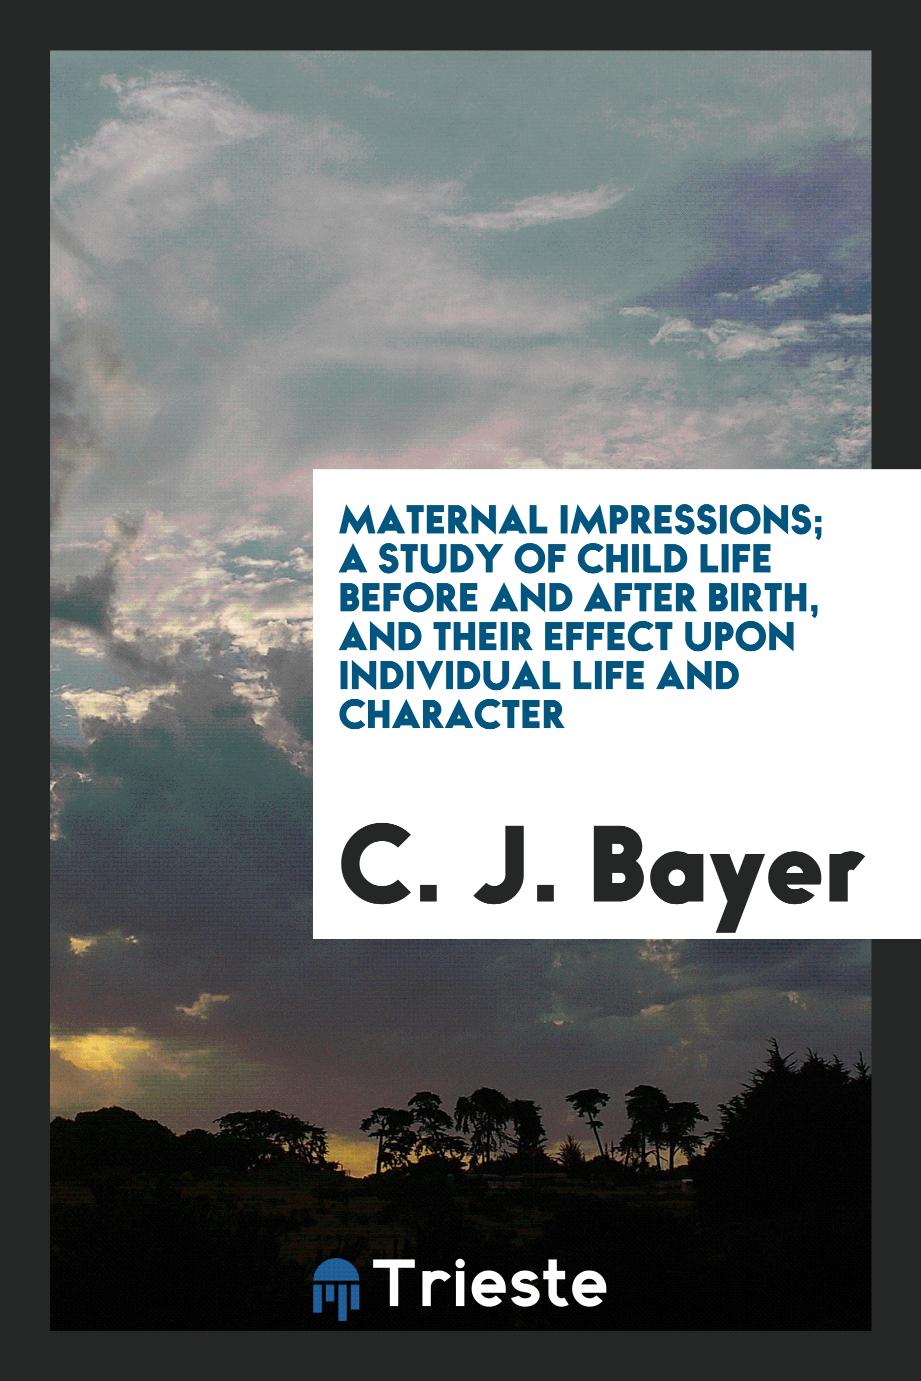 Maternal impressions; a study of child life before and after birth, and their effect upon individual life and character